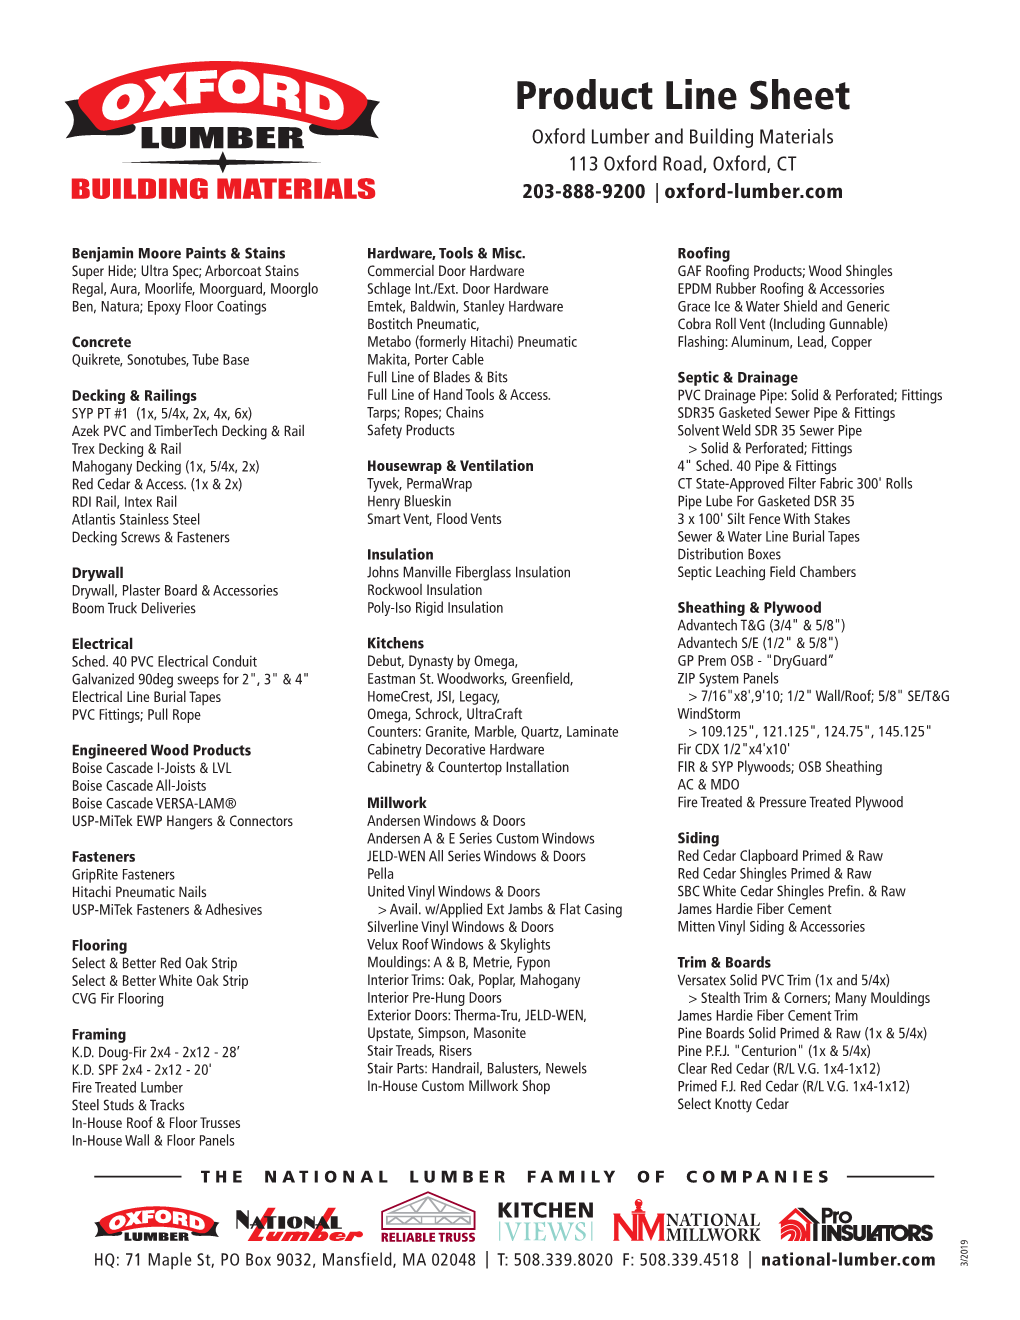 Product Line Sheet Oxford Lumber and Building Materials 113 Oxford Road, Oxford, CT 203-888-9200 | Oxford-Lumber.Com